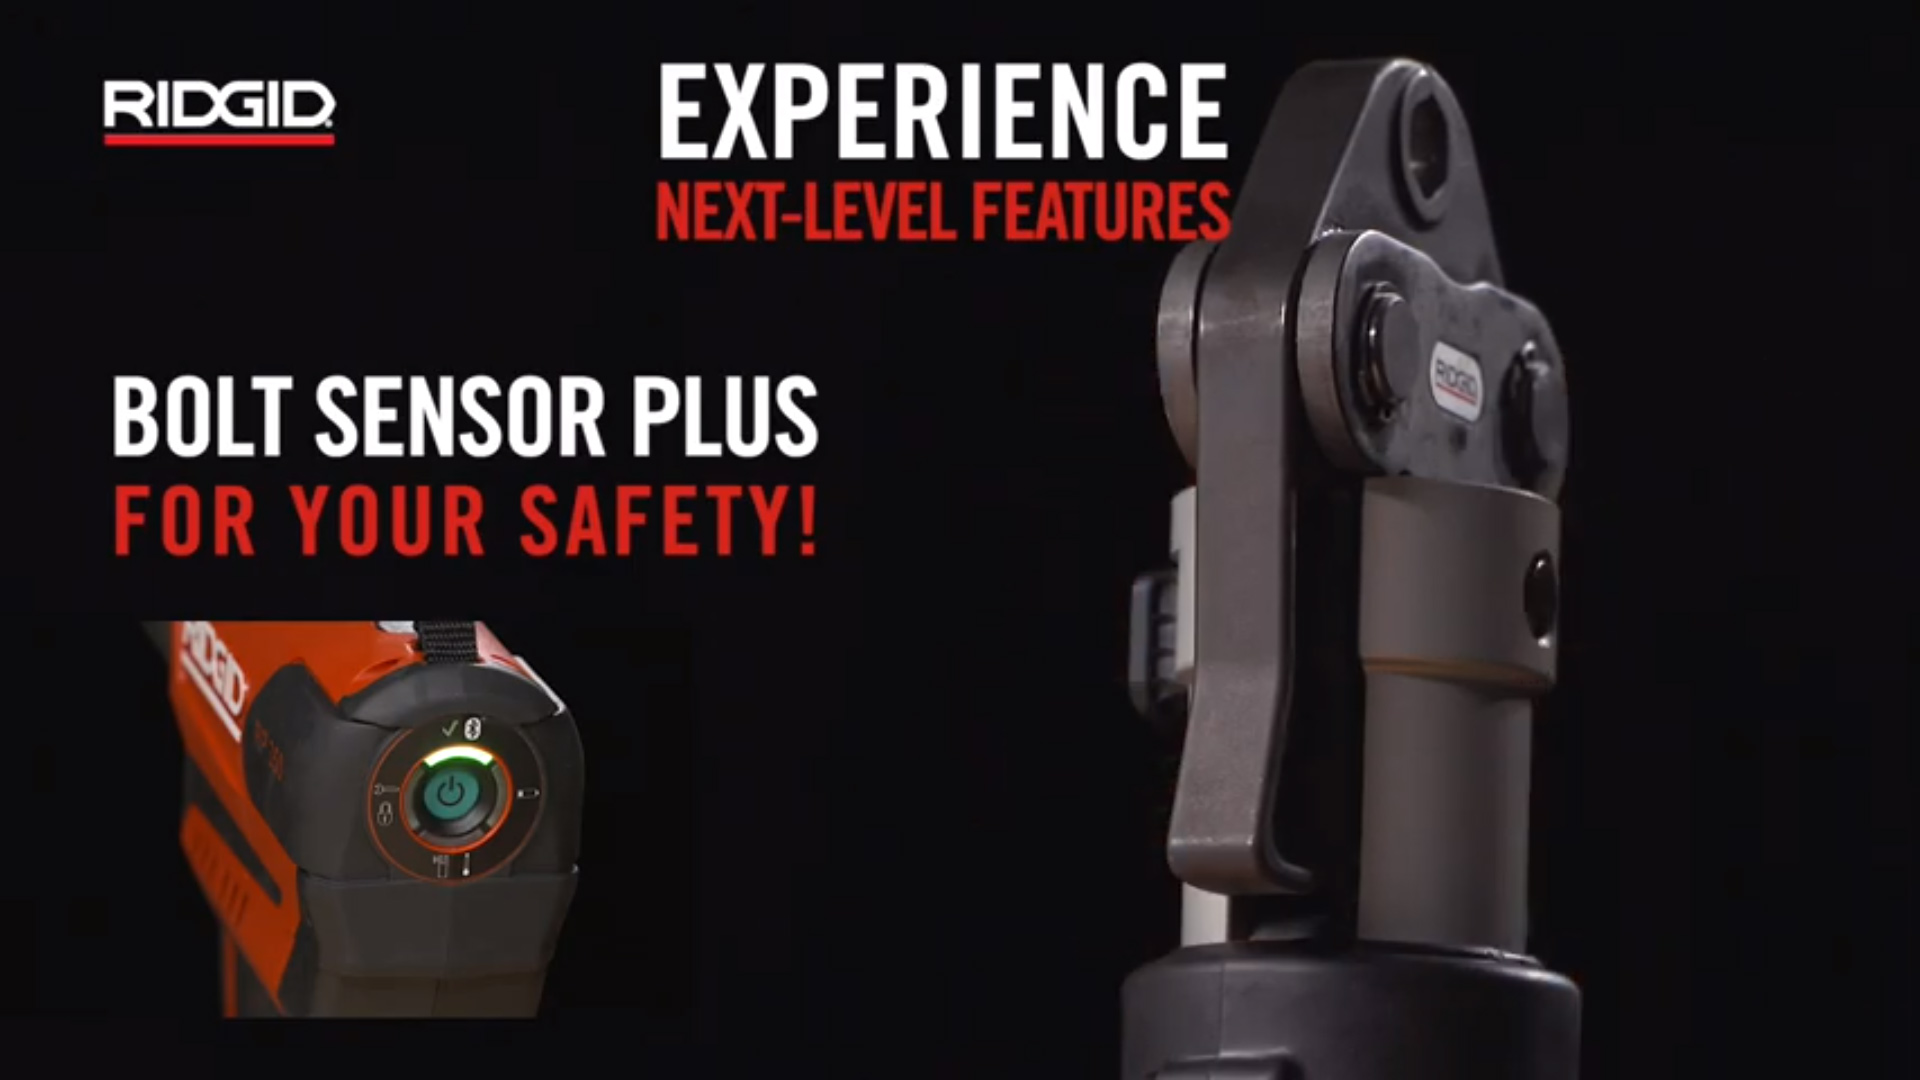 Bolt sensor plus for the users safety.